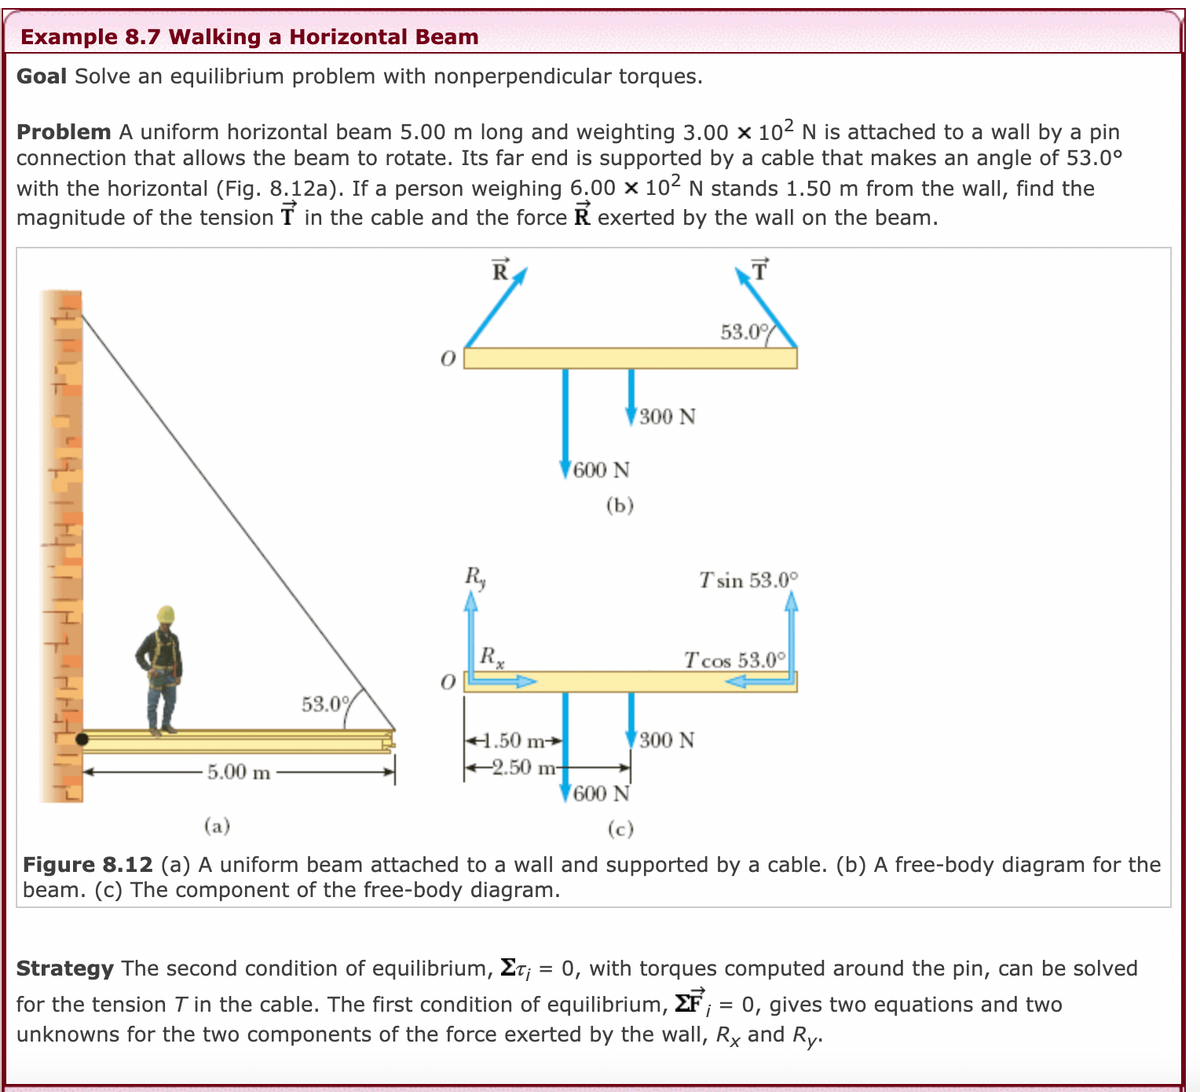 Example 8.7 Walking a Horizontal Beam
Goal Solve an equilibrium problem with nonperpendicular torques.
Problem A uniform horizontal beam 5.00 m long and weighting 3.00 x 102 N is attached to a wall by a pin
connection that allows the beam to rotate. Its far end is supported by a cable that makes an angle of 53.0°
with the horizontal (Fig. 8.12a). If a person weighing 6.00 × 102 N stands 1.50 m from the wall, find the
magnitude of the tension T in the cable and the force R exerted by the wall on the beam.
R
53.0
(300 N
600 N
(b)
R,
T sin 53.0°
Rx
T cos 53.0°
53.0%
4.50 m→
(300 N
5.00 m
-2.50 m-
600 N
(a)
(c)
Figure 8.12 (a) A uniform beam attached to a wall and supported by a cable. (b) A free-body diagram for the
beam. (c) The component of the free-body diagram.
Strategy The second condition of equilibrium, Et; = 0, with torques computed around the pin, can be solved
for the tension T in the cable. The first condition of equilibrium, EF, = 0, gives two equations and two
unknowns for the two components of the force exerted by the wall, Rx and Ry.
